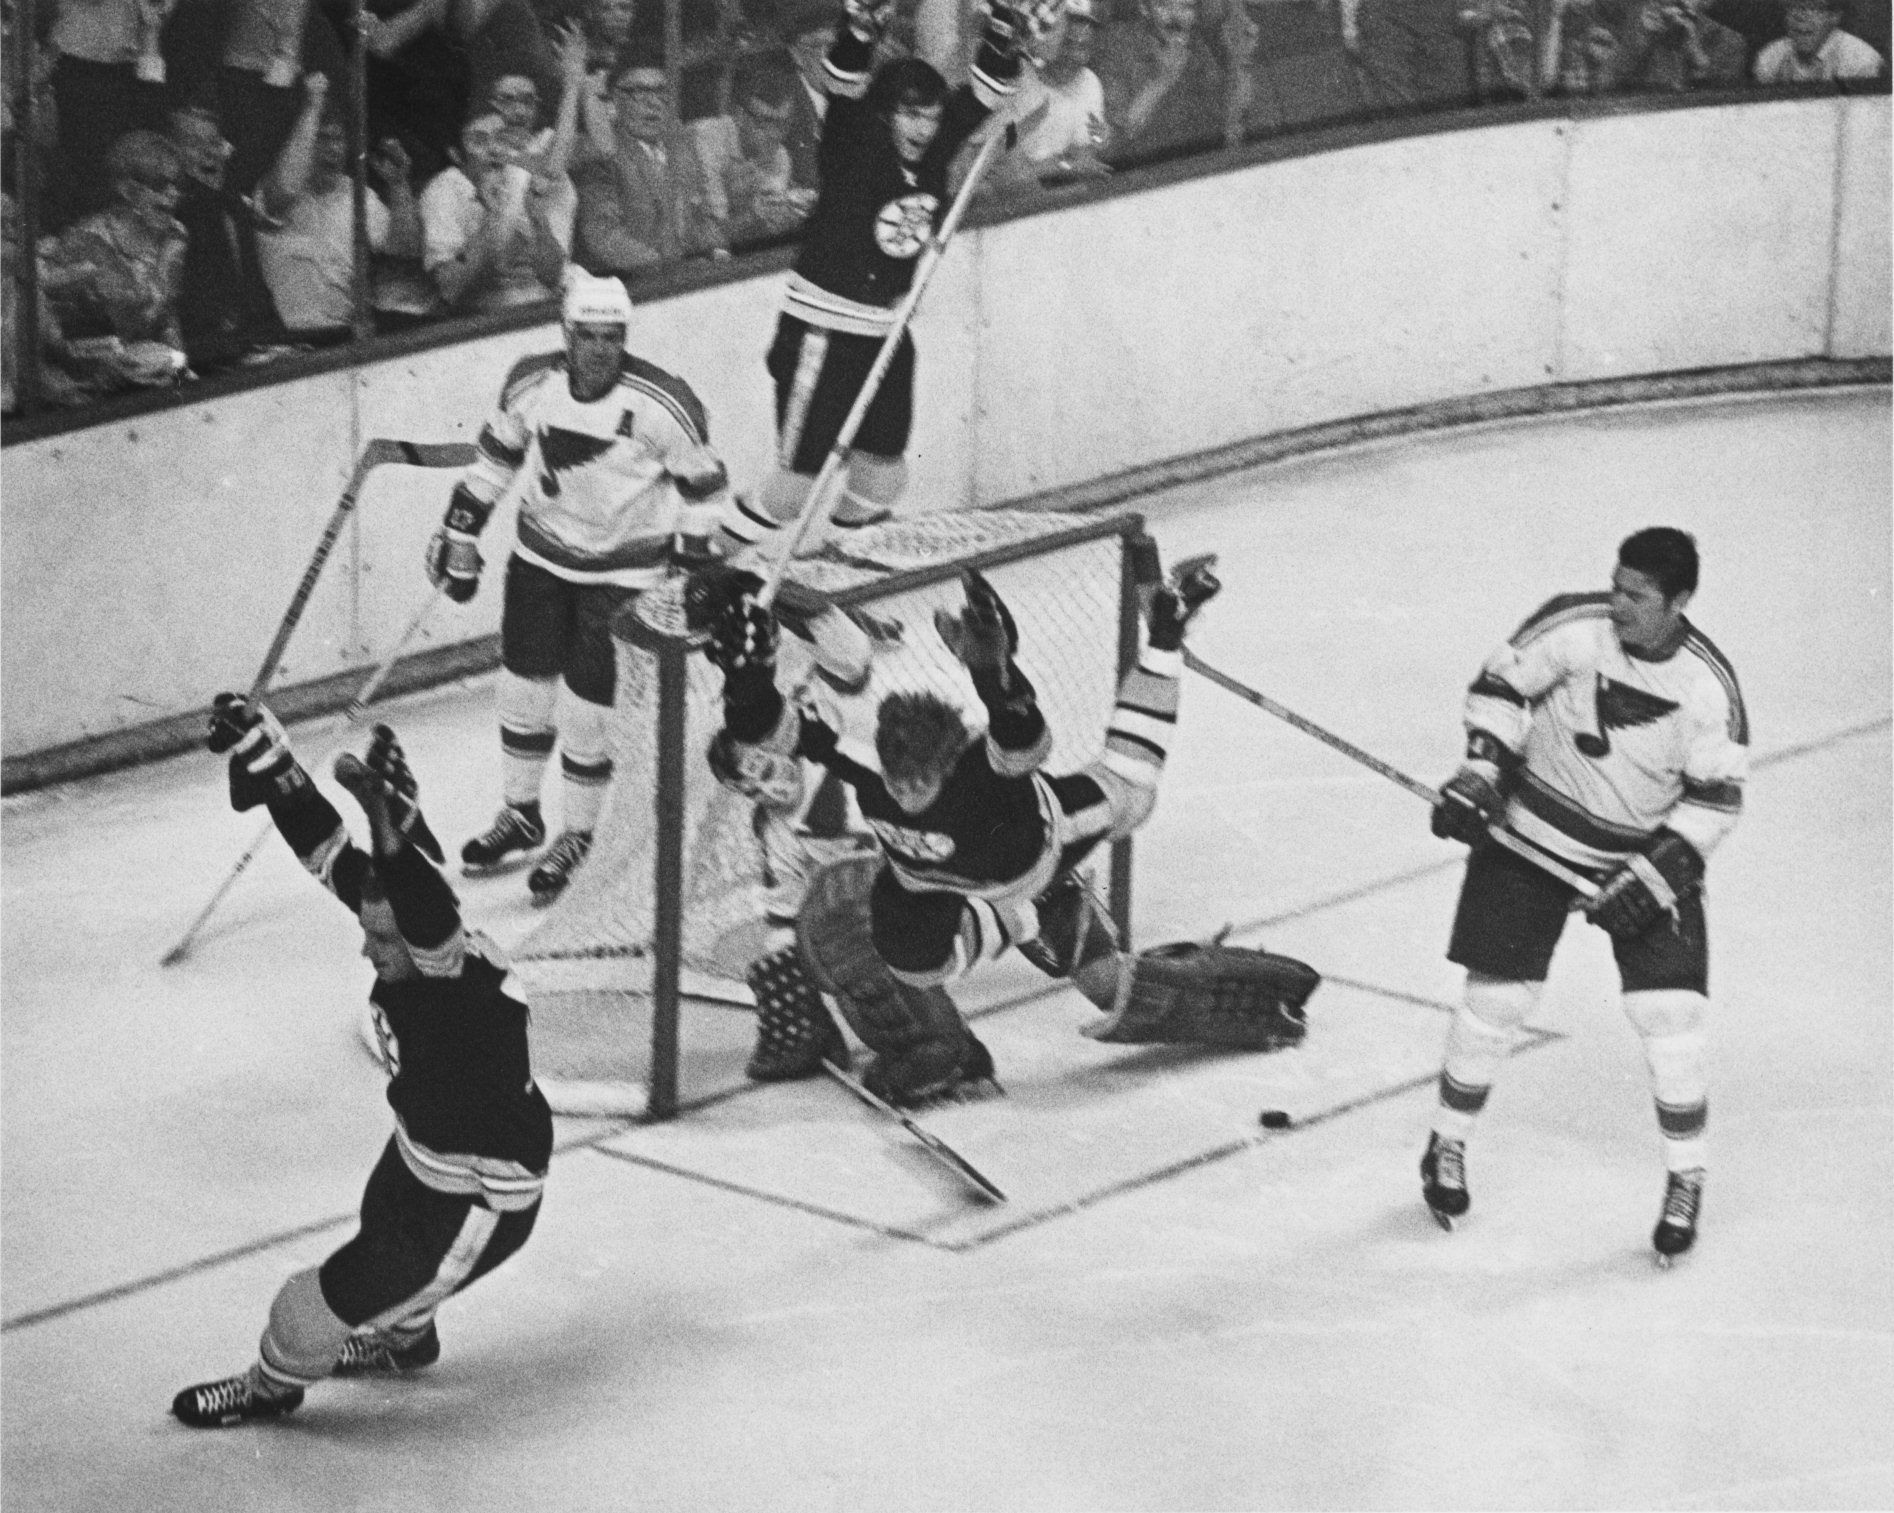 The story behind the 1970 photo of Bobby Orr flying through the air after a  Mother's Day Stanley Cup–winning goal